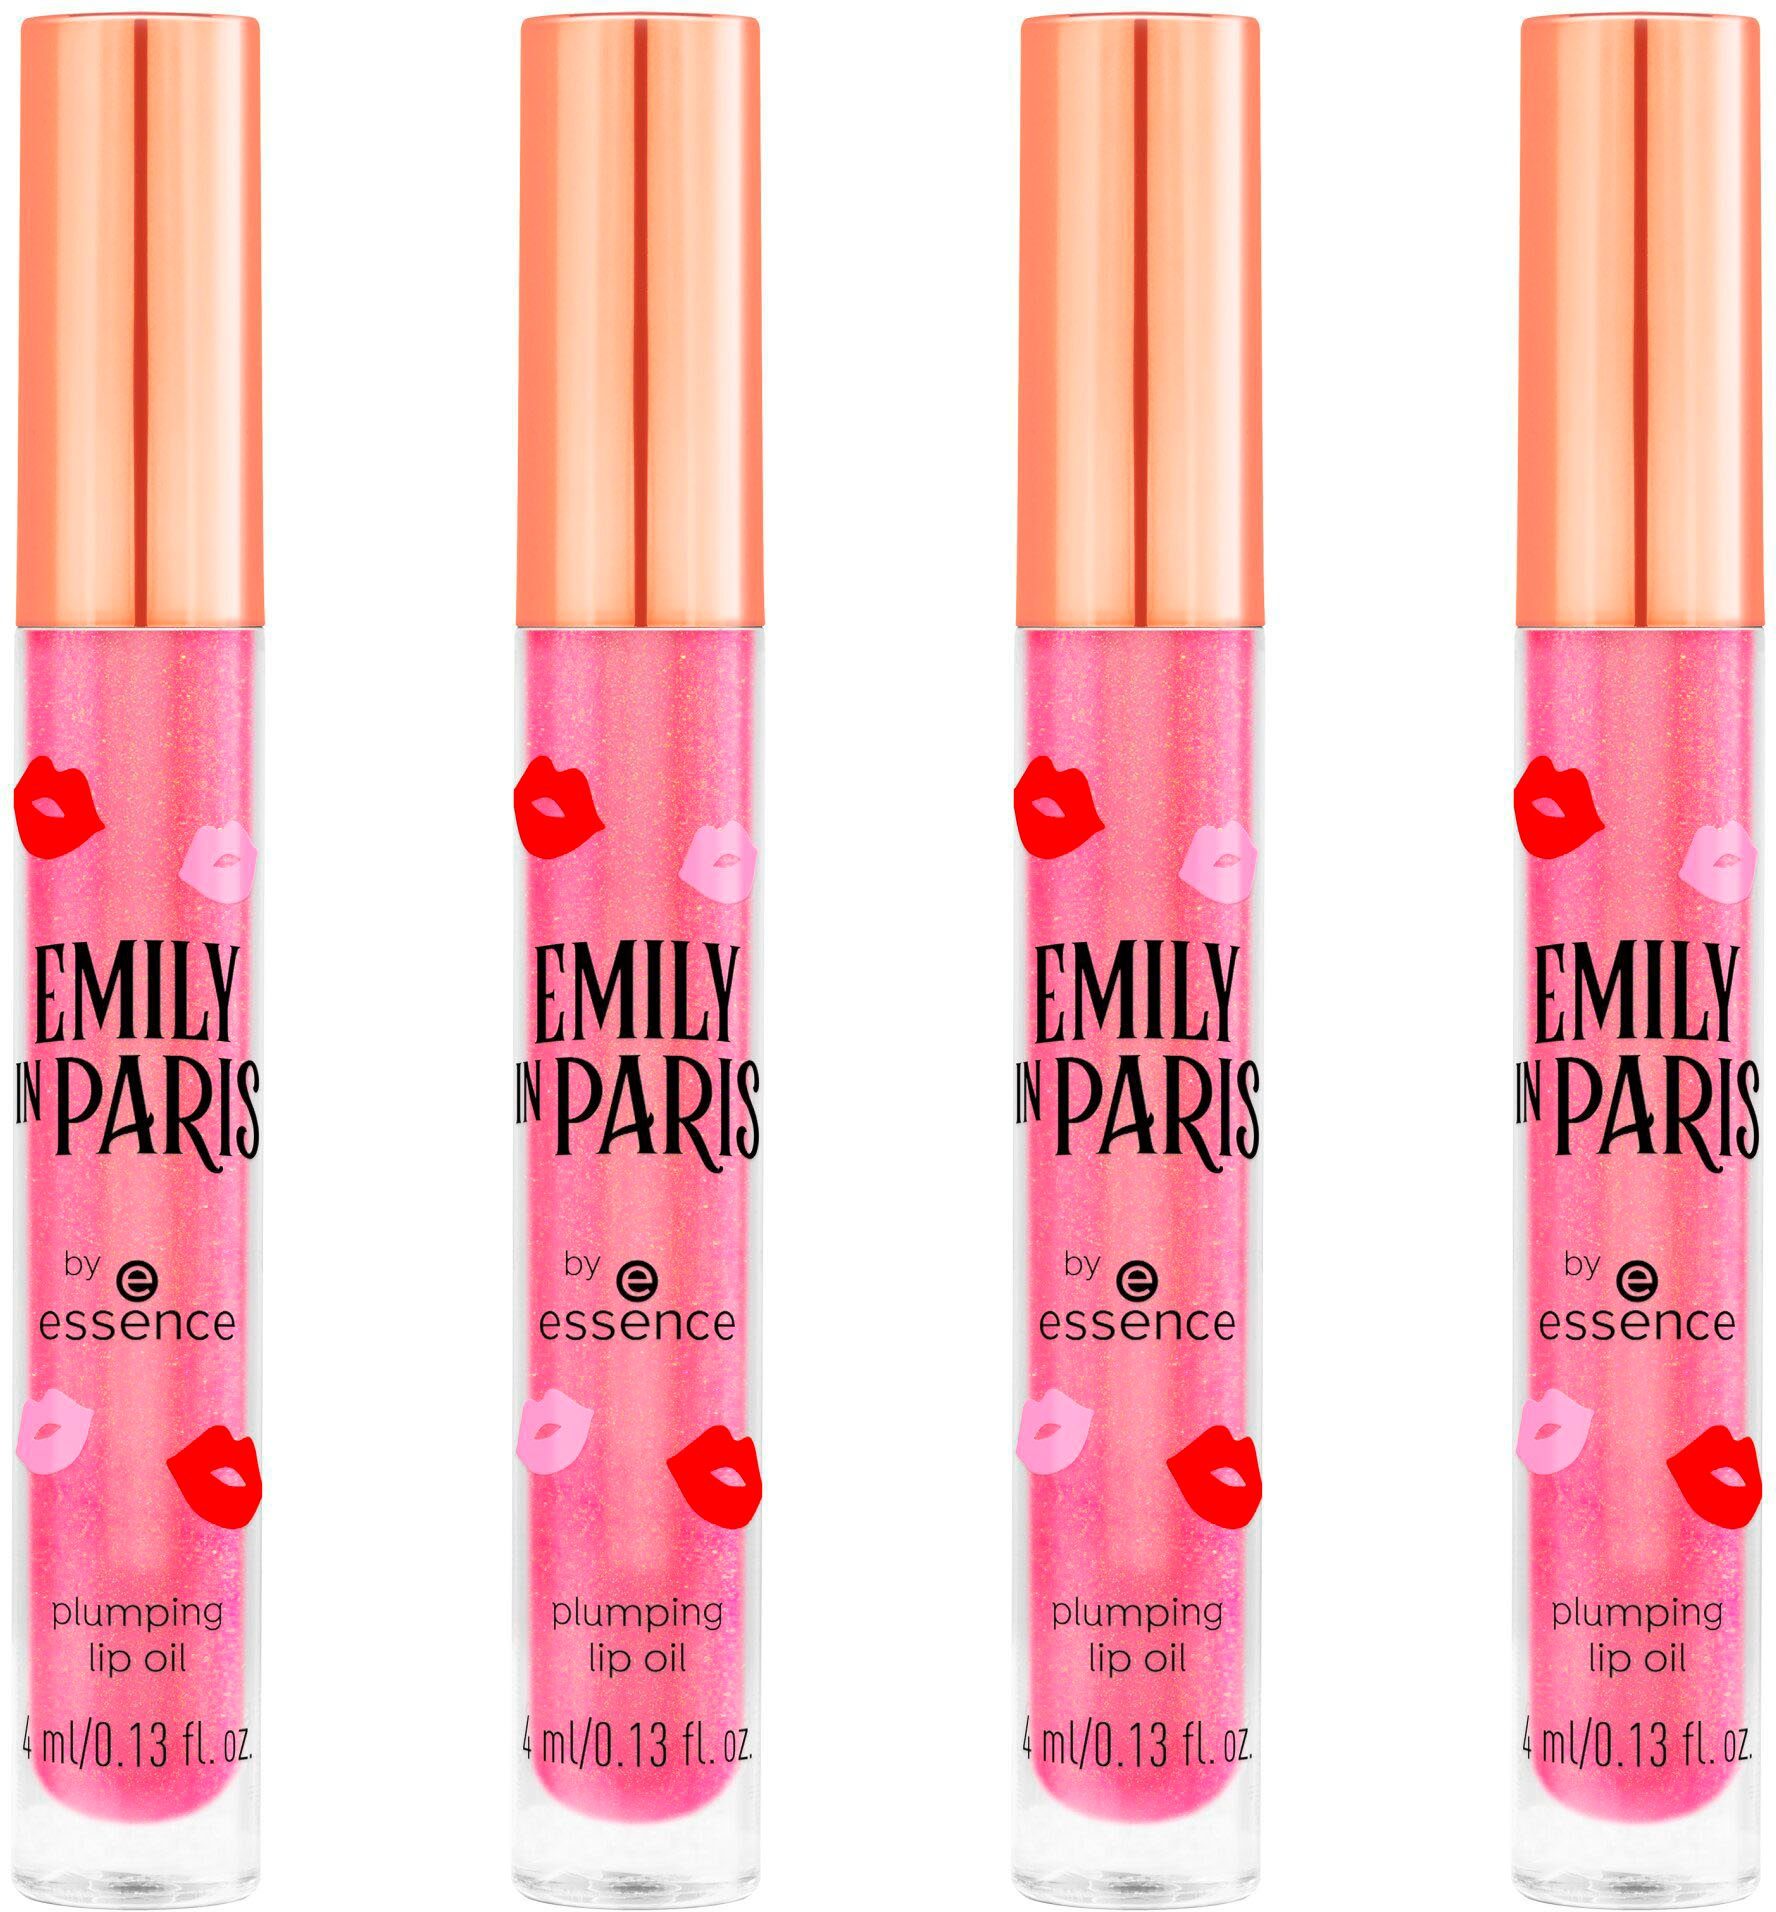 plumping PARIS Lipgloss EMILY essence oil by lip Essence IN